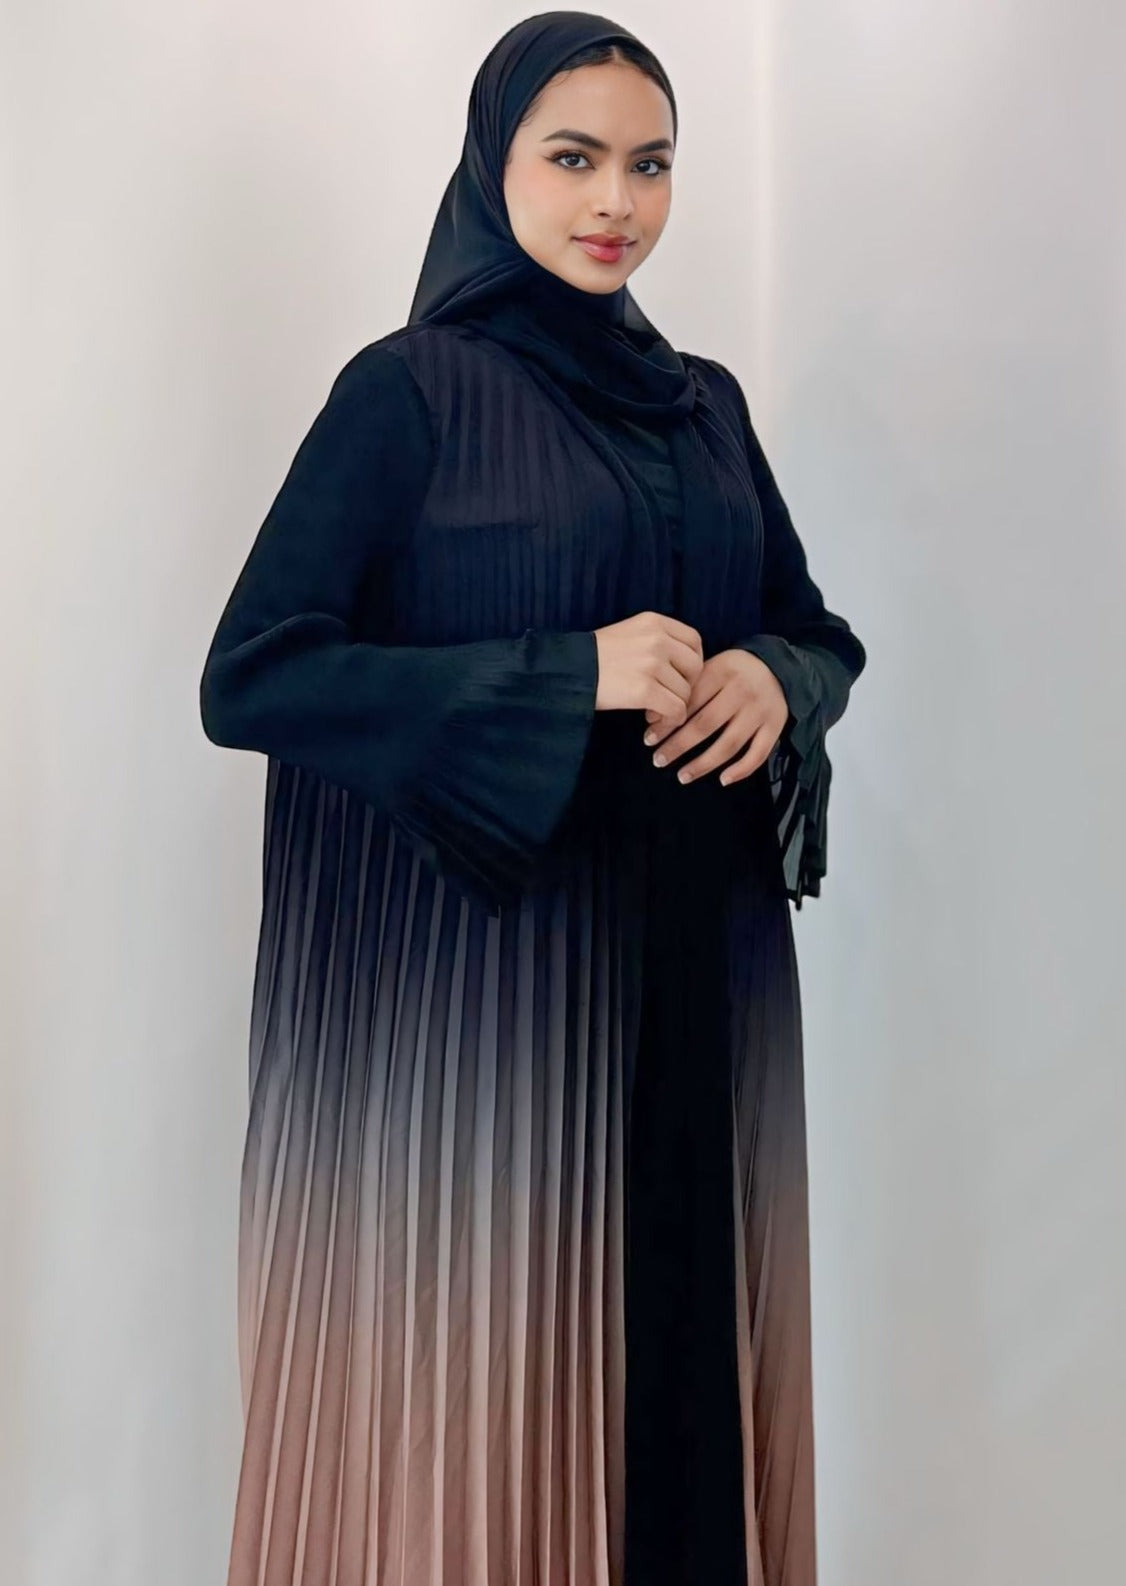 Haneen alsaify X Becosy  in ombre abaya without belt